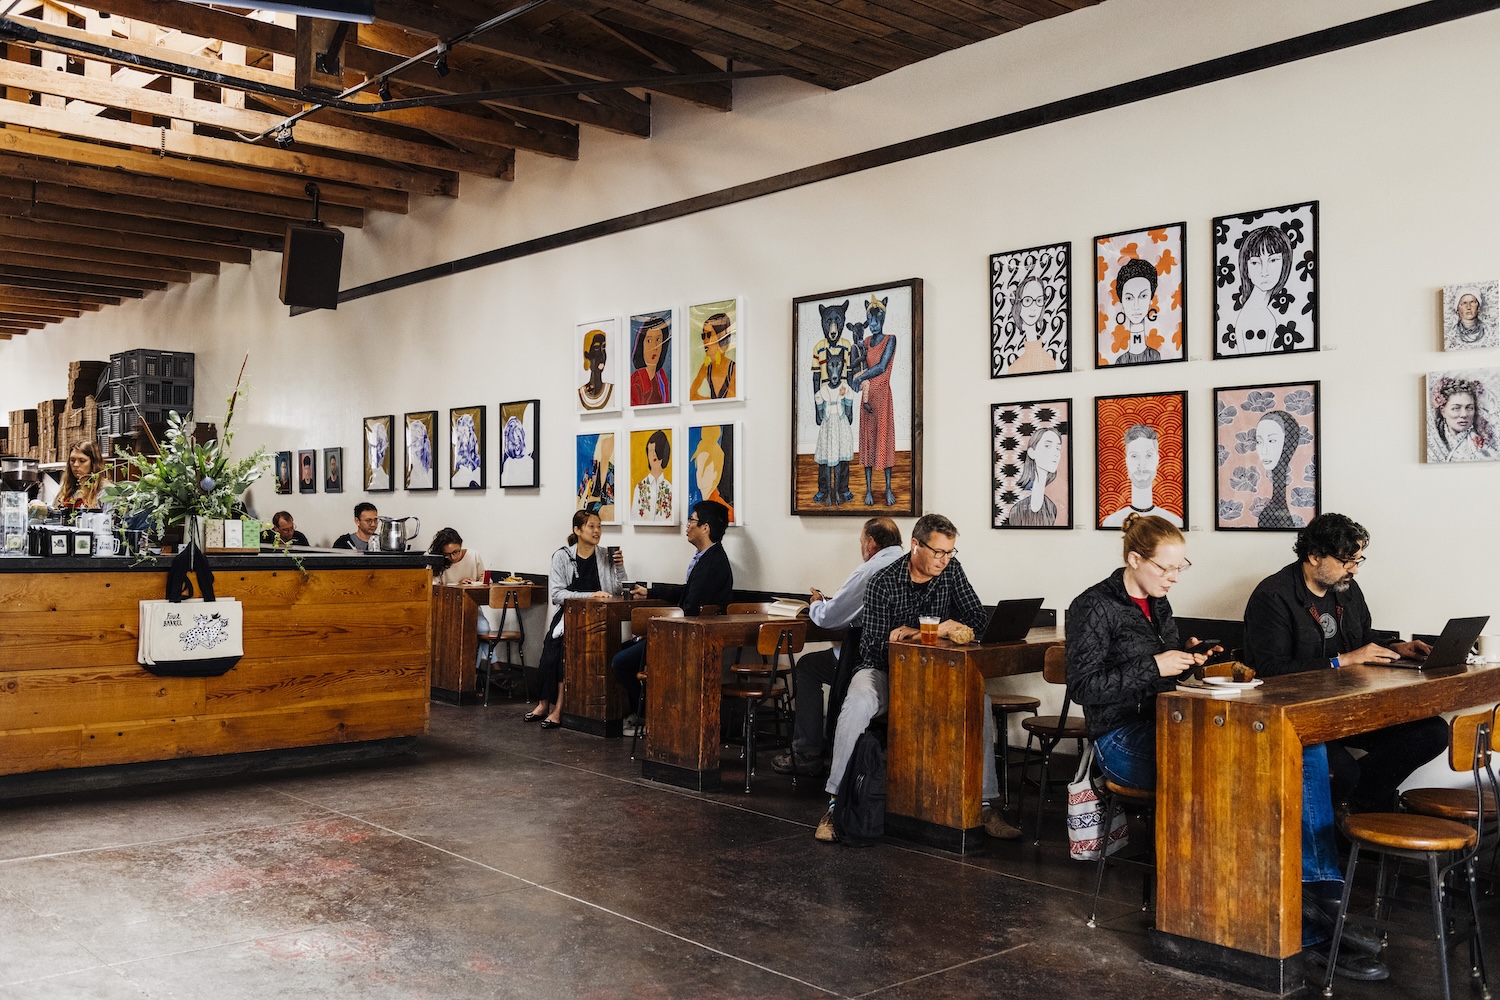 people sitting at wooden tables, paintings on wall, wooden columns on ceiling